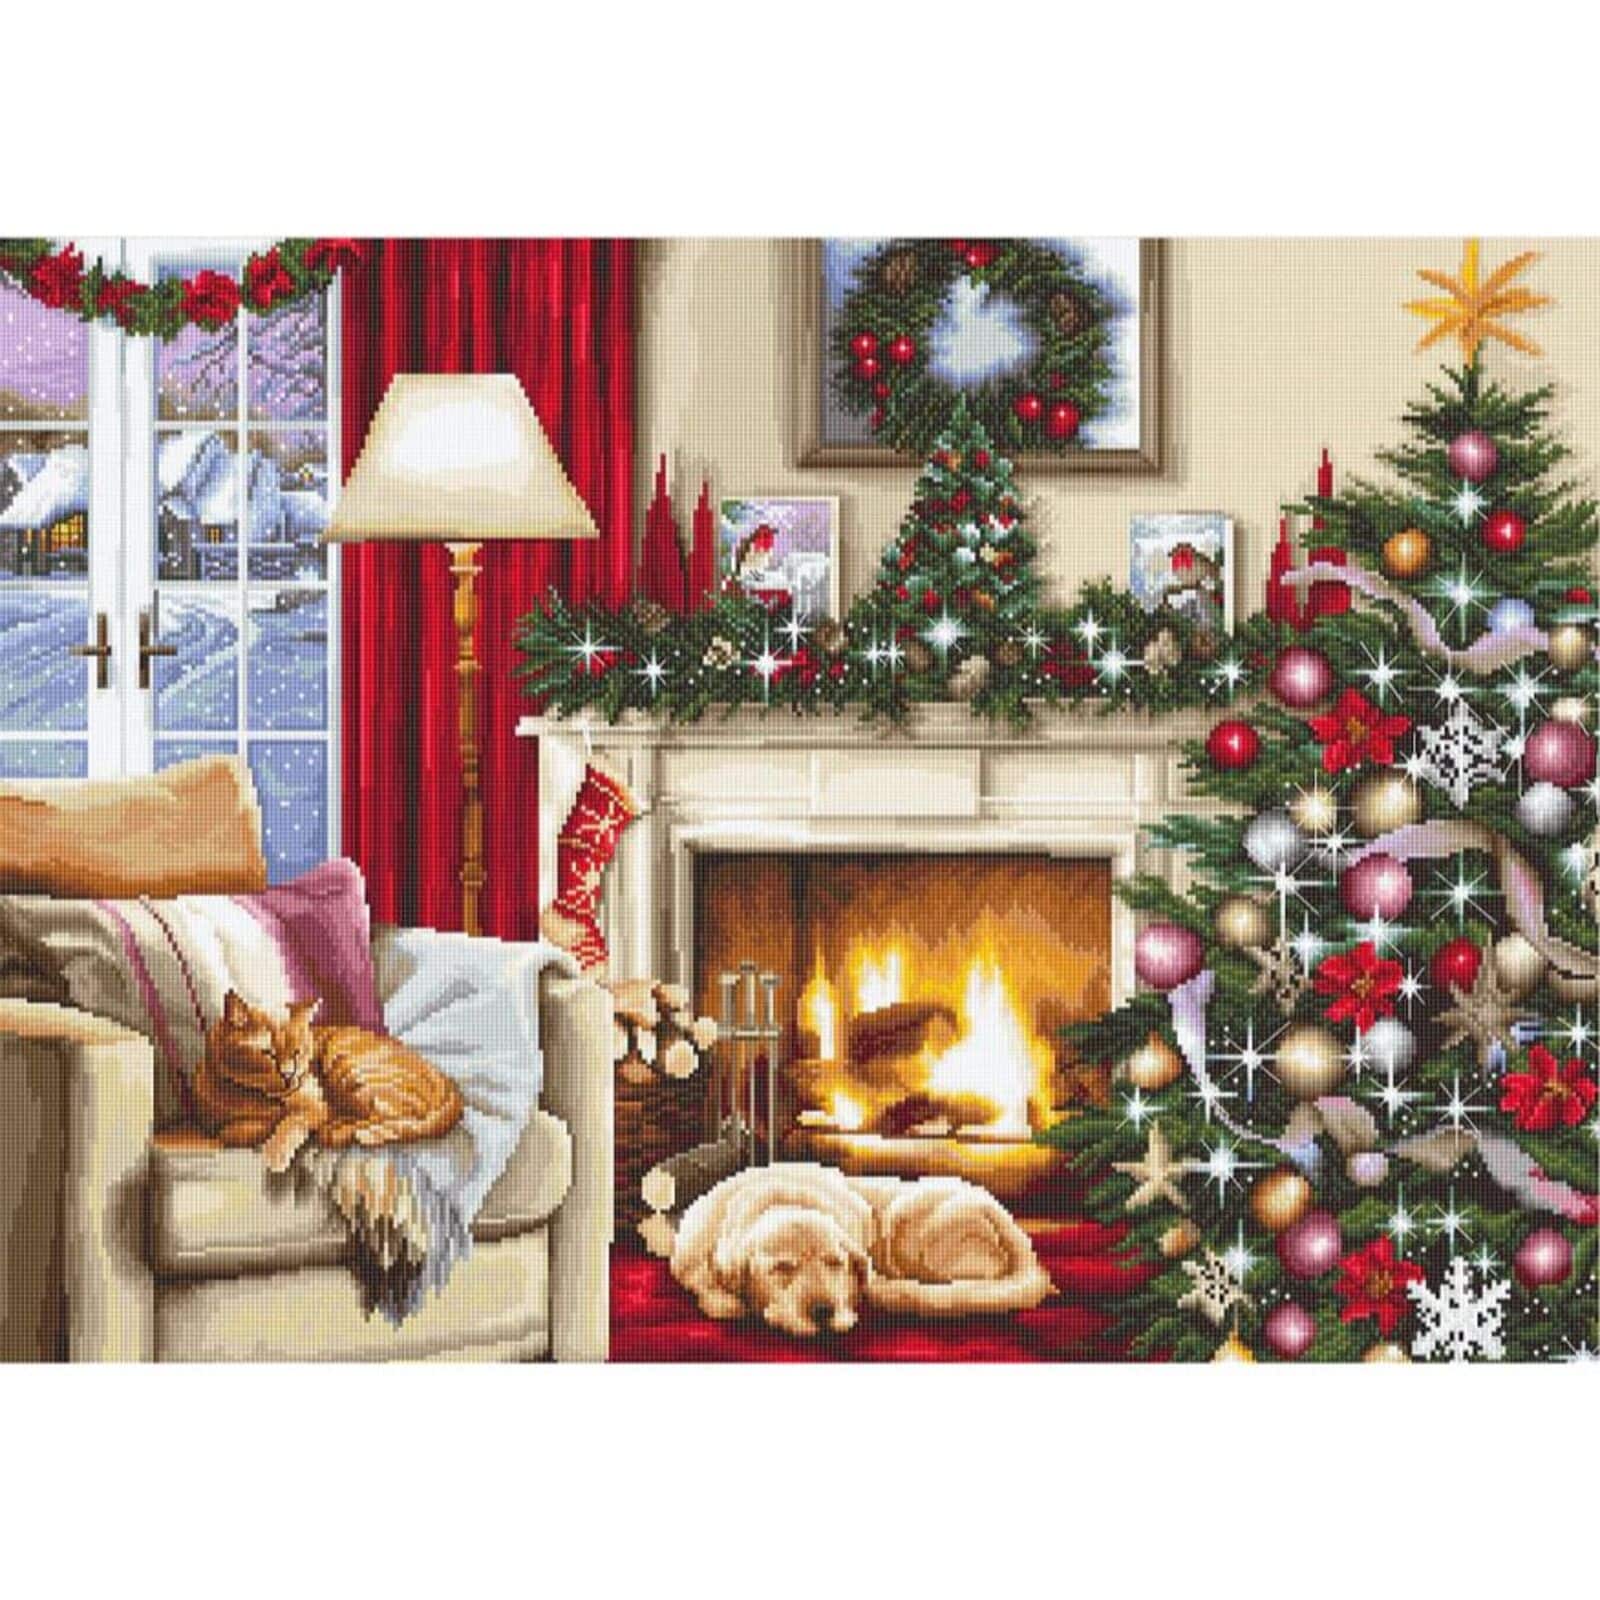 Luca-S Christmas Interior Counted Cross Stitch Kit